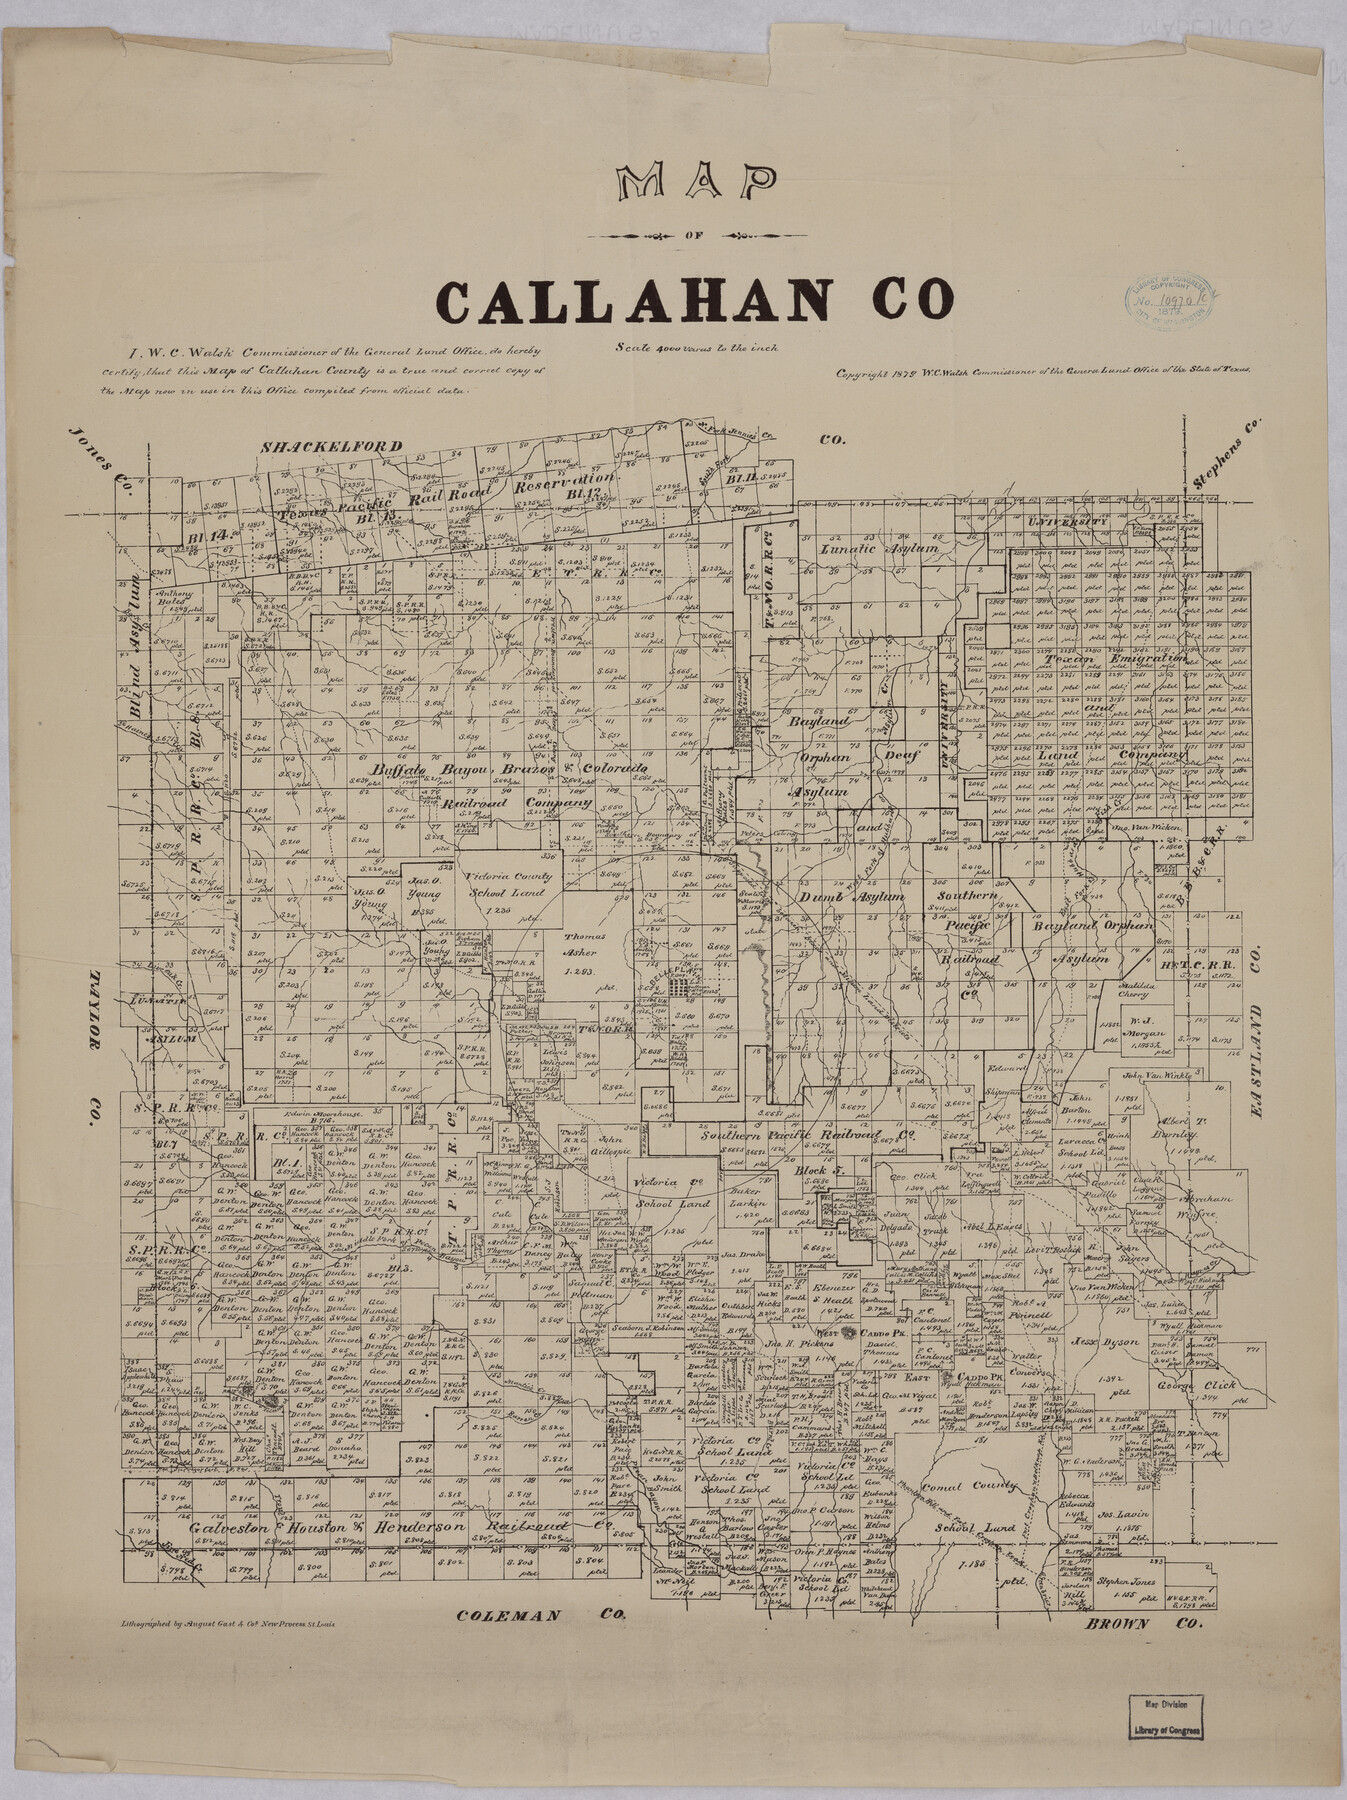 88916, Map of Callahan Co[unty], Library of Congress